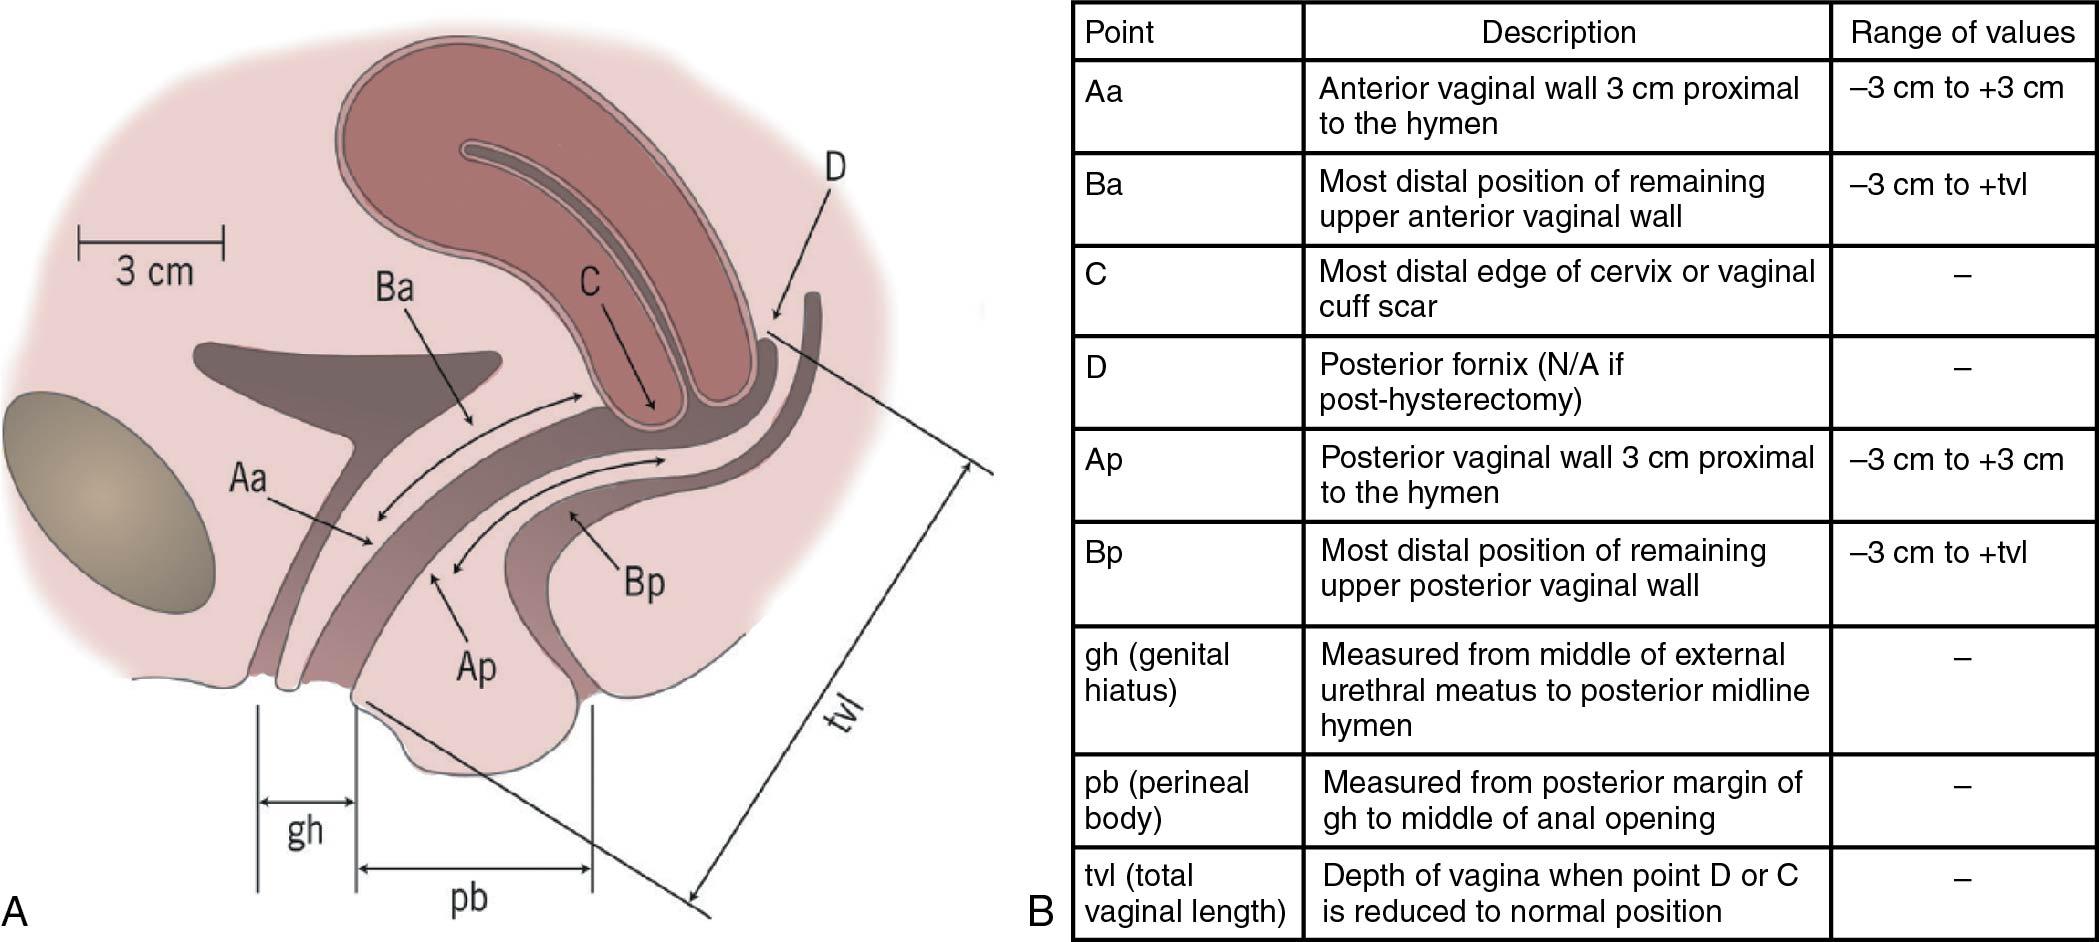 Fig. 20.14, A, Landmarks for the Pelvic Organ Prolapse Quantification System (POP-Q) system. B, POP-Q points of reference.